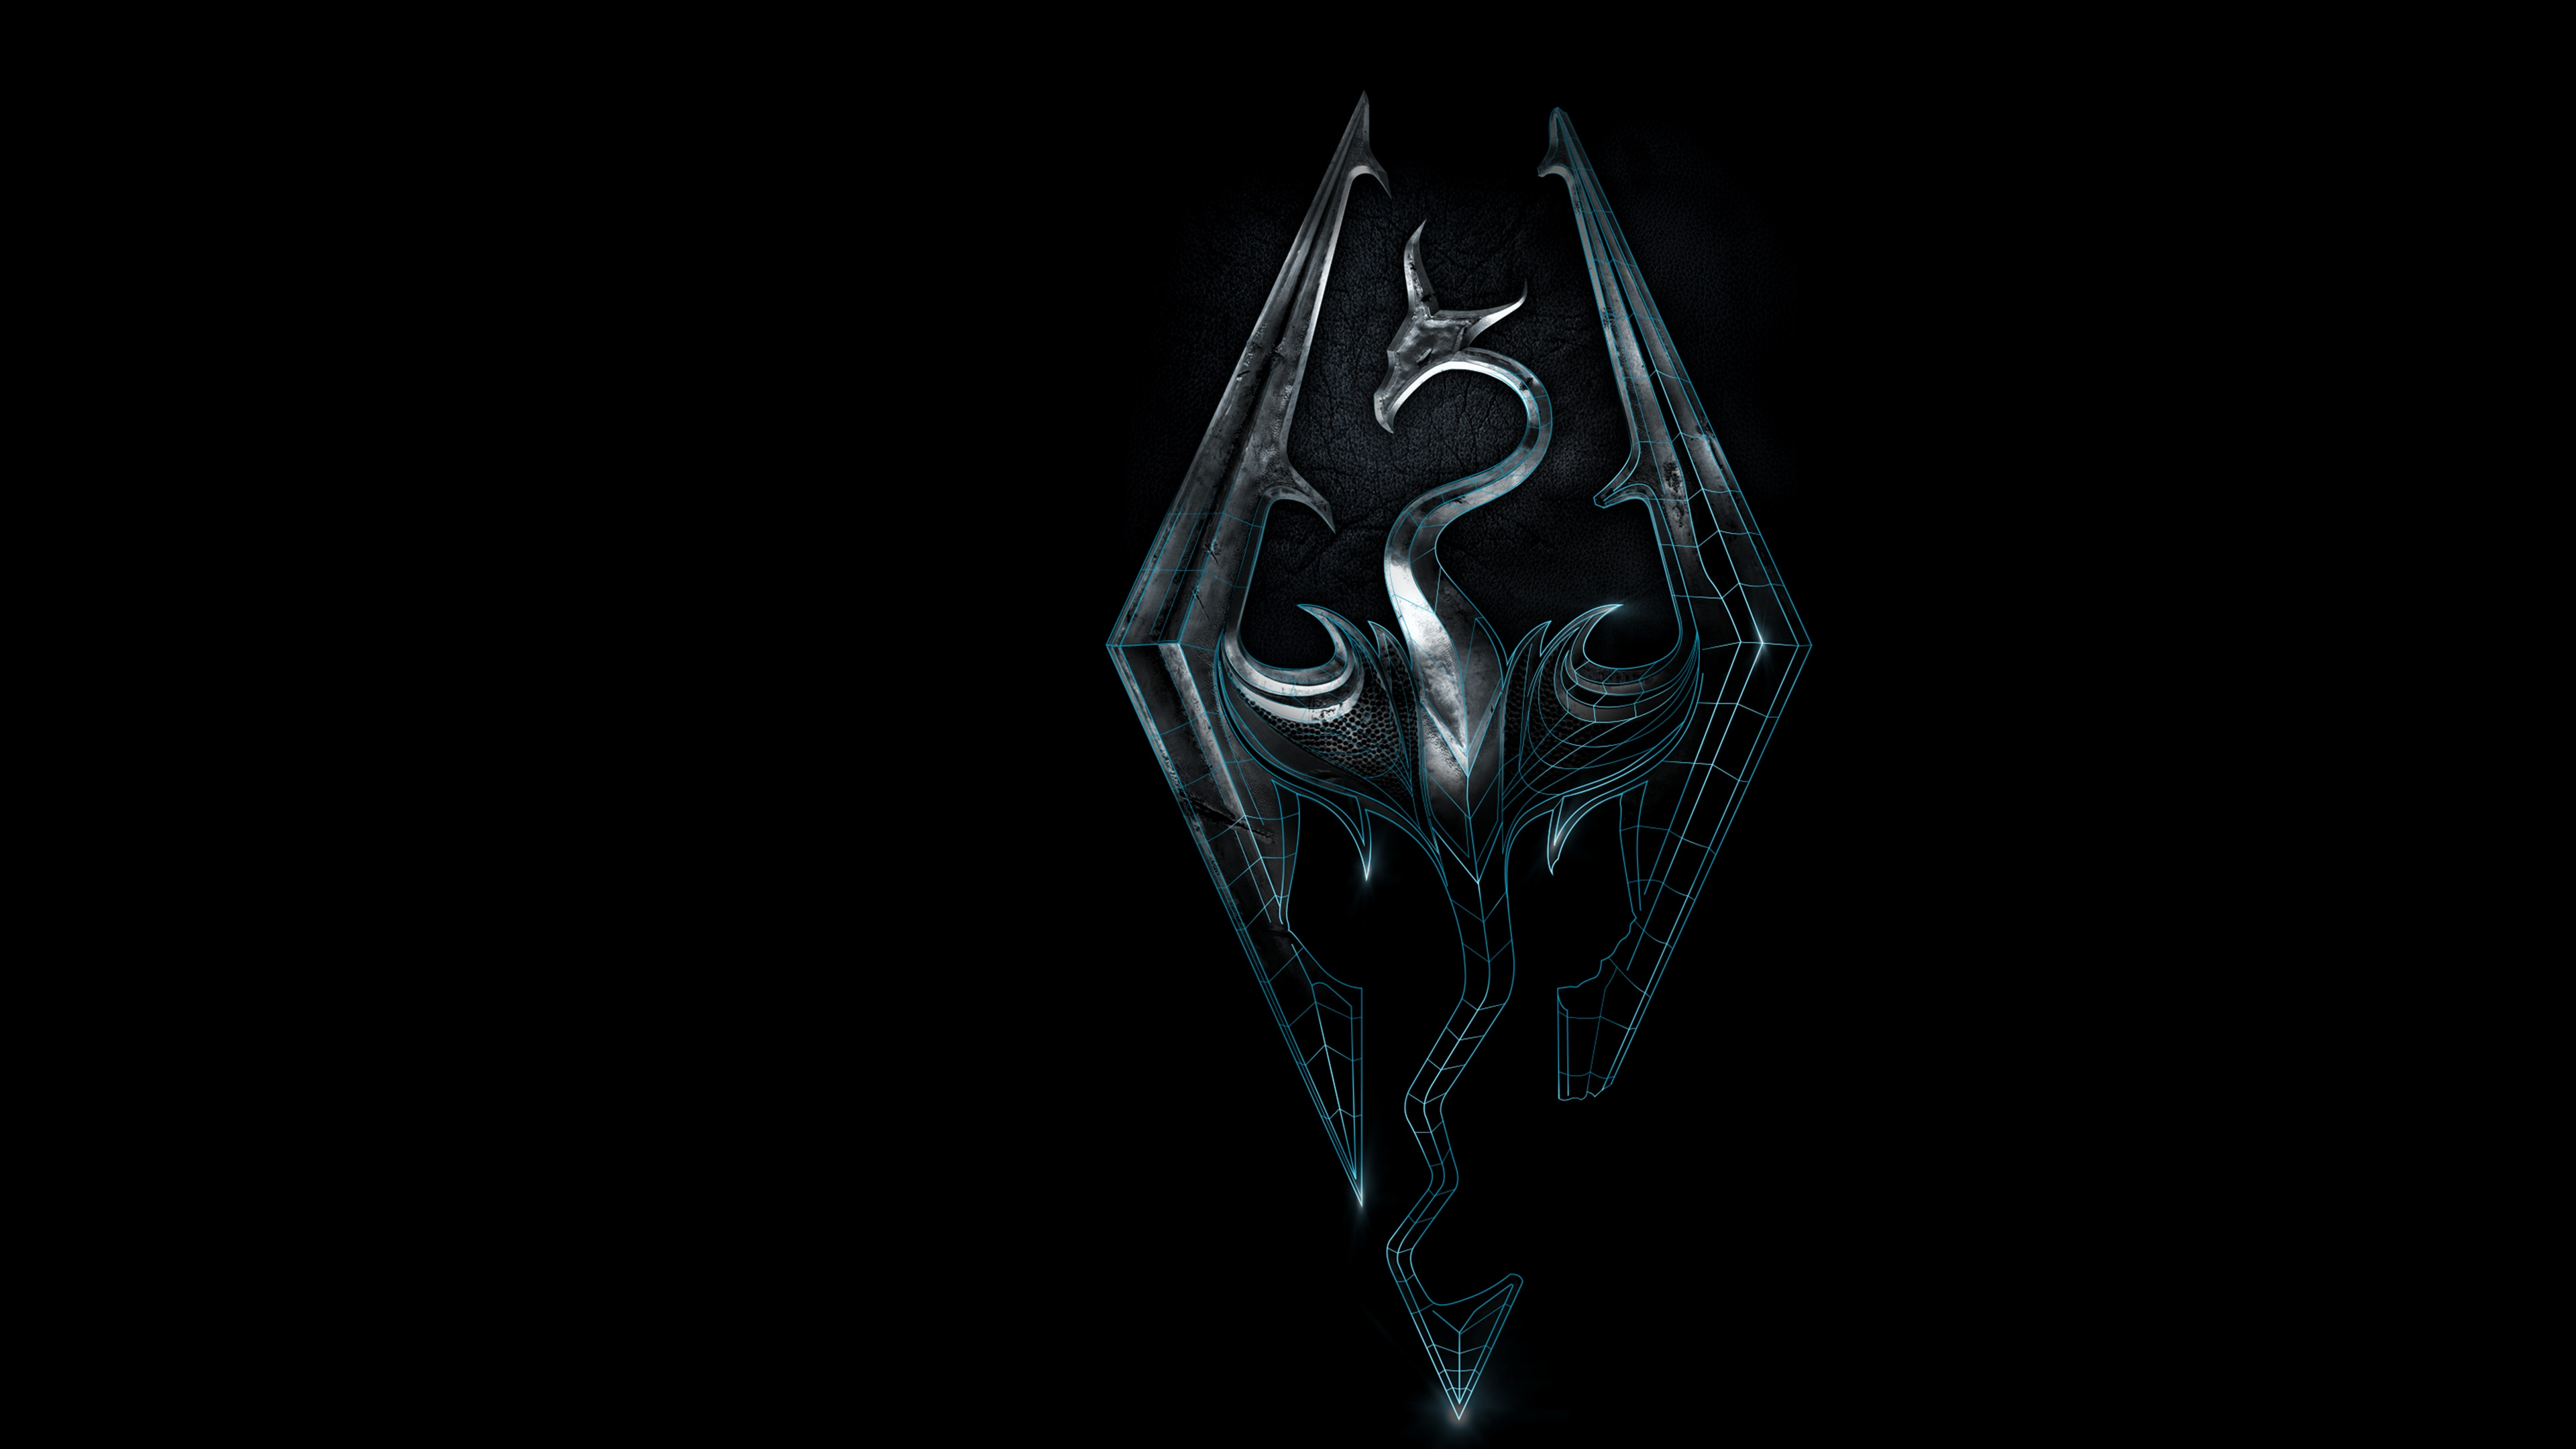 Skyrim logo wallpapers and backgrounds k hd dual screen